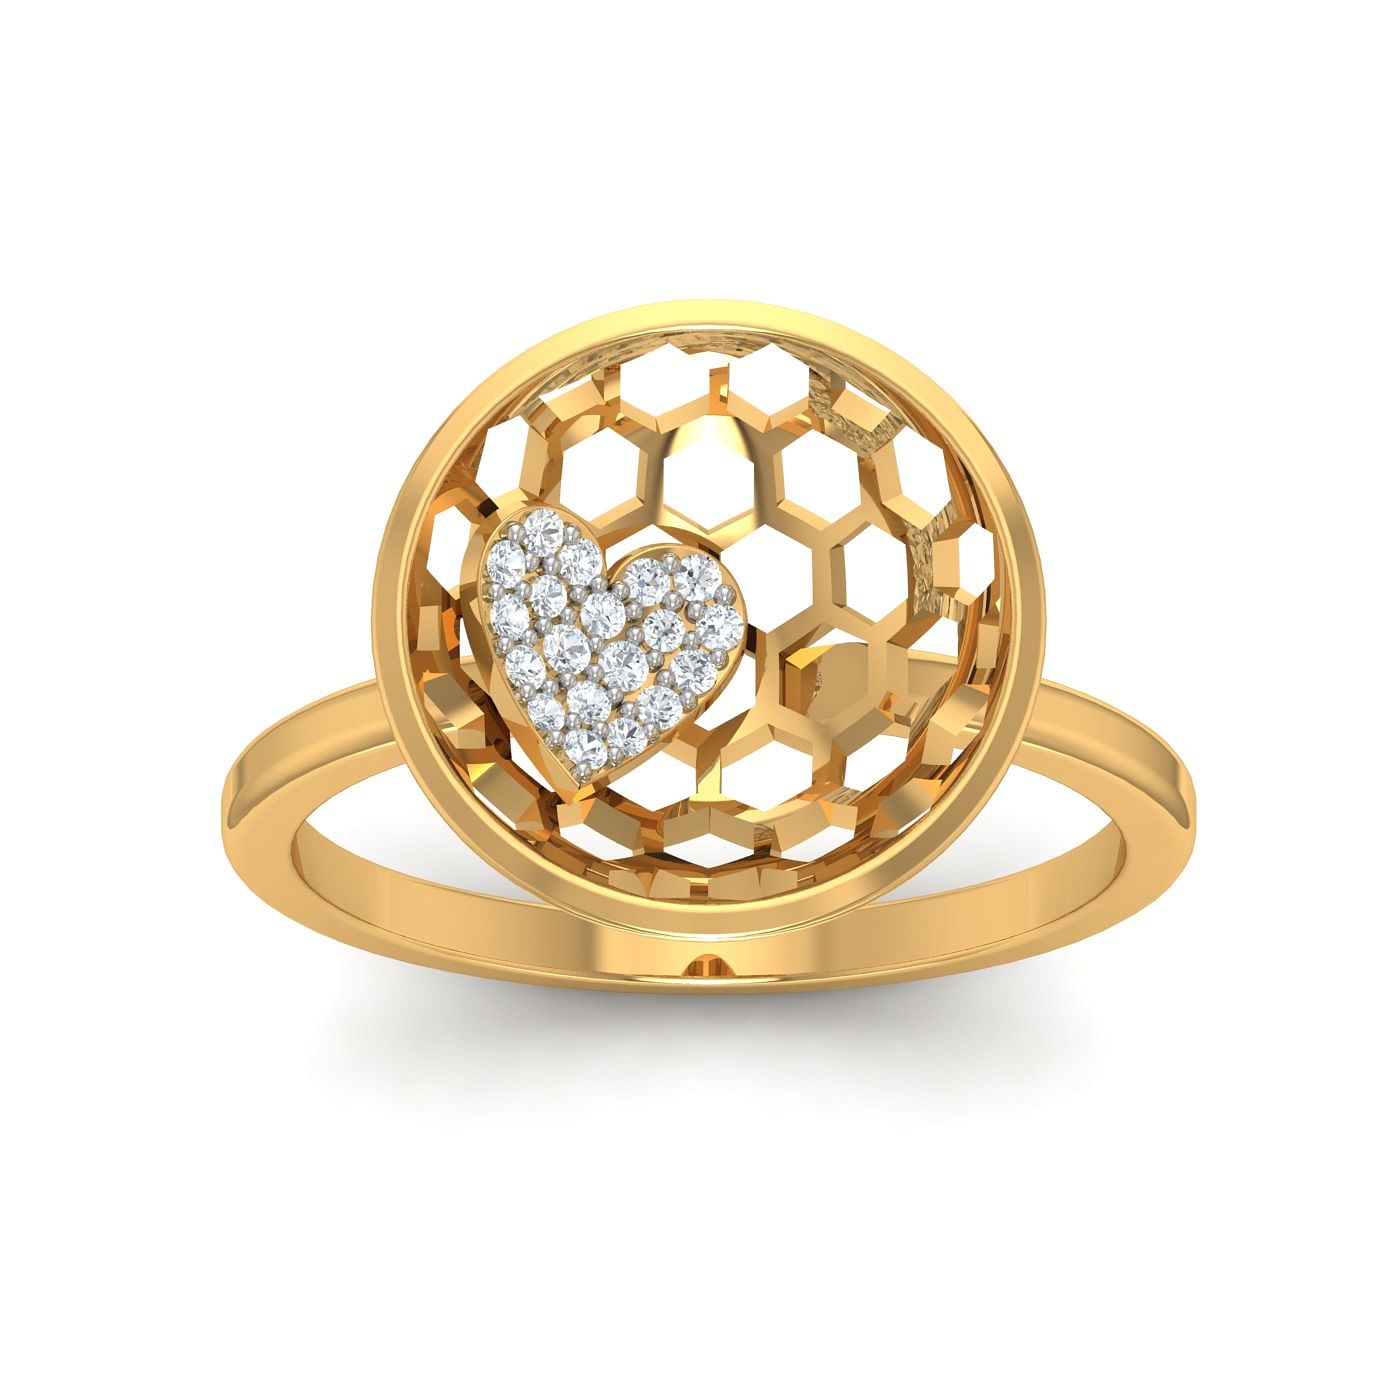 Heart Shape Design Diamond Ring With Yellow Gold For Women